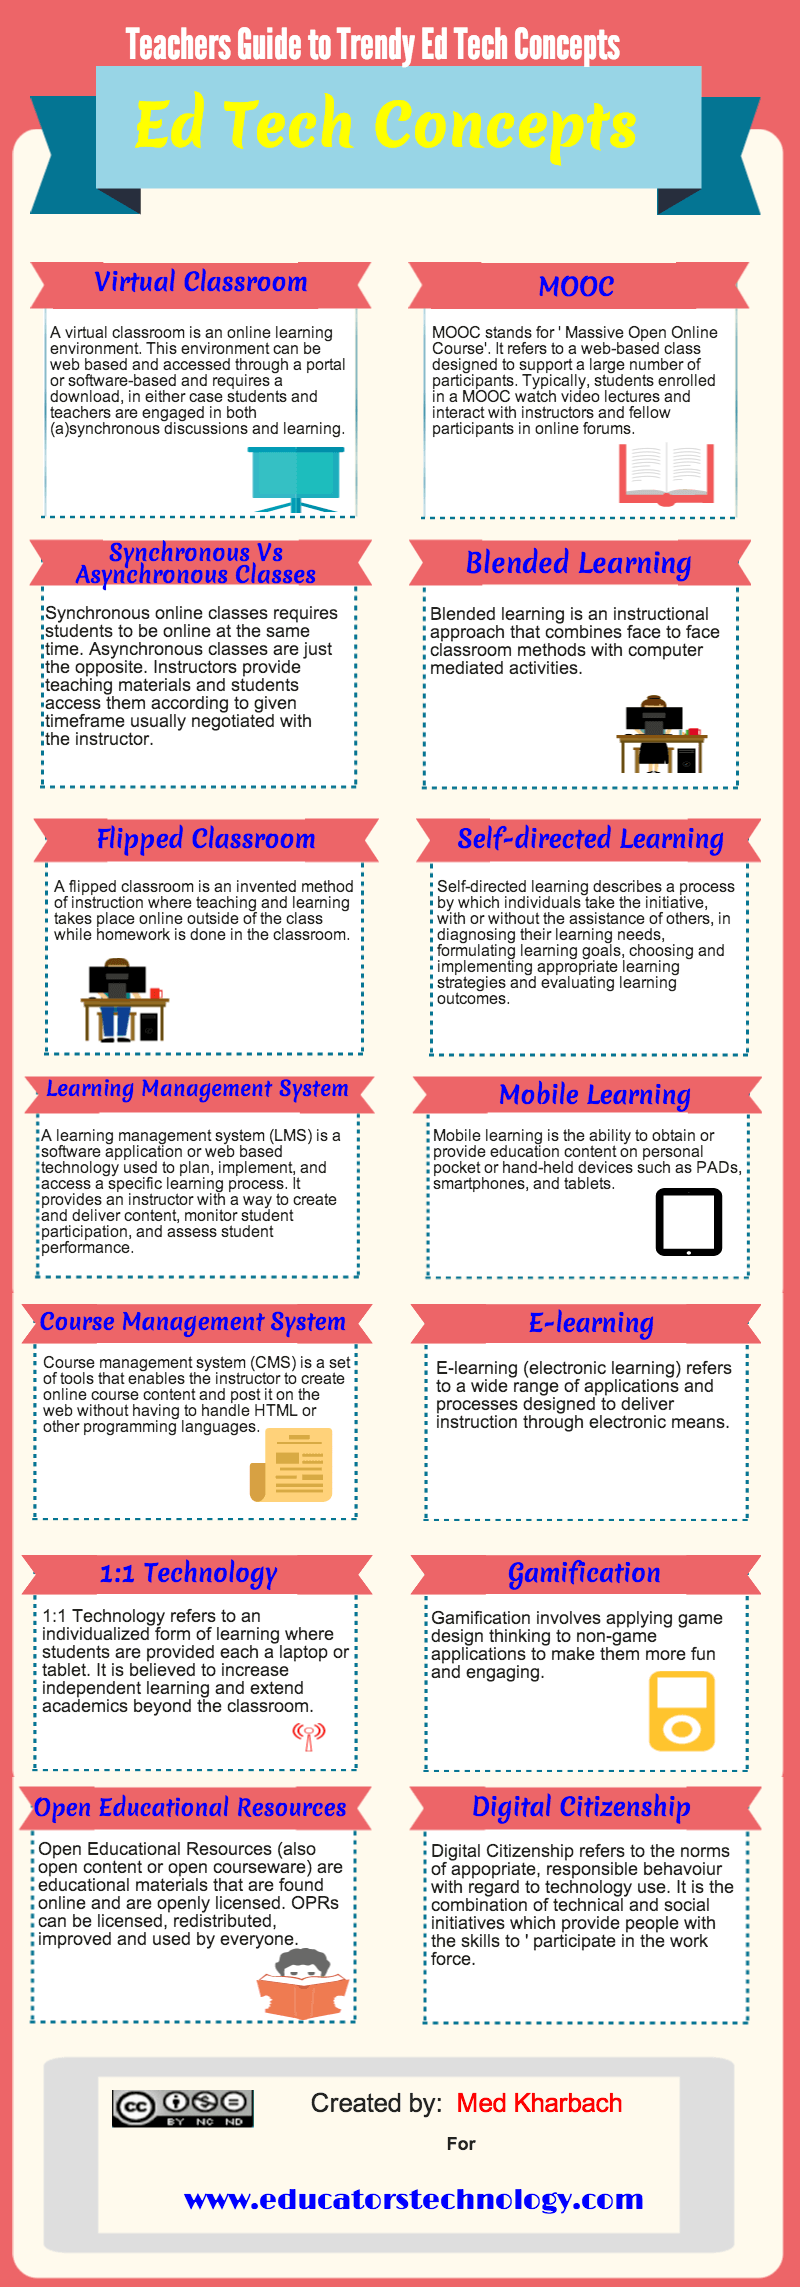 Teachers-Guide-to-Trendy-EdTech-Concepts-Infographic